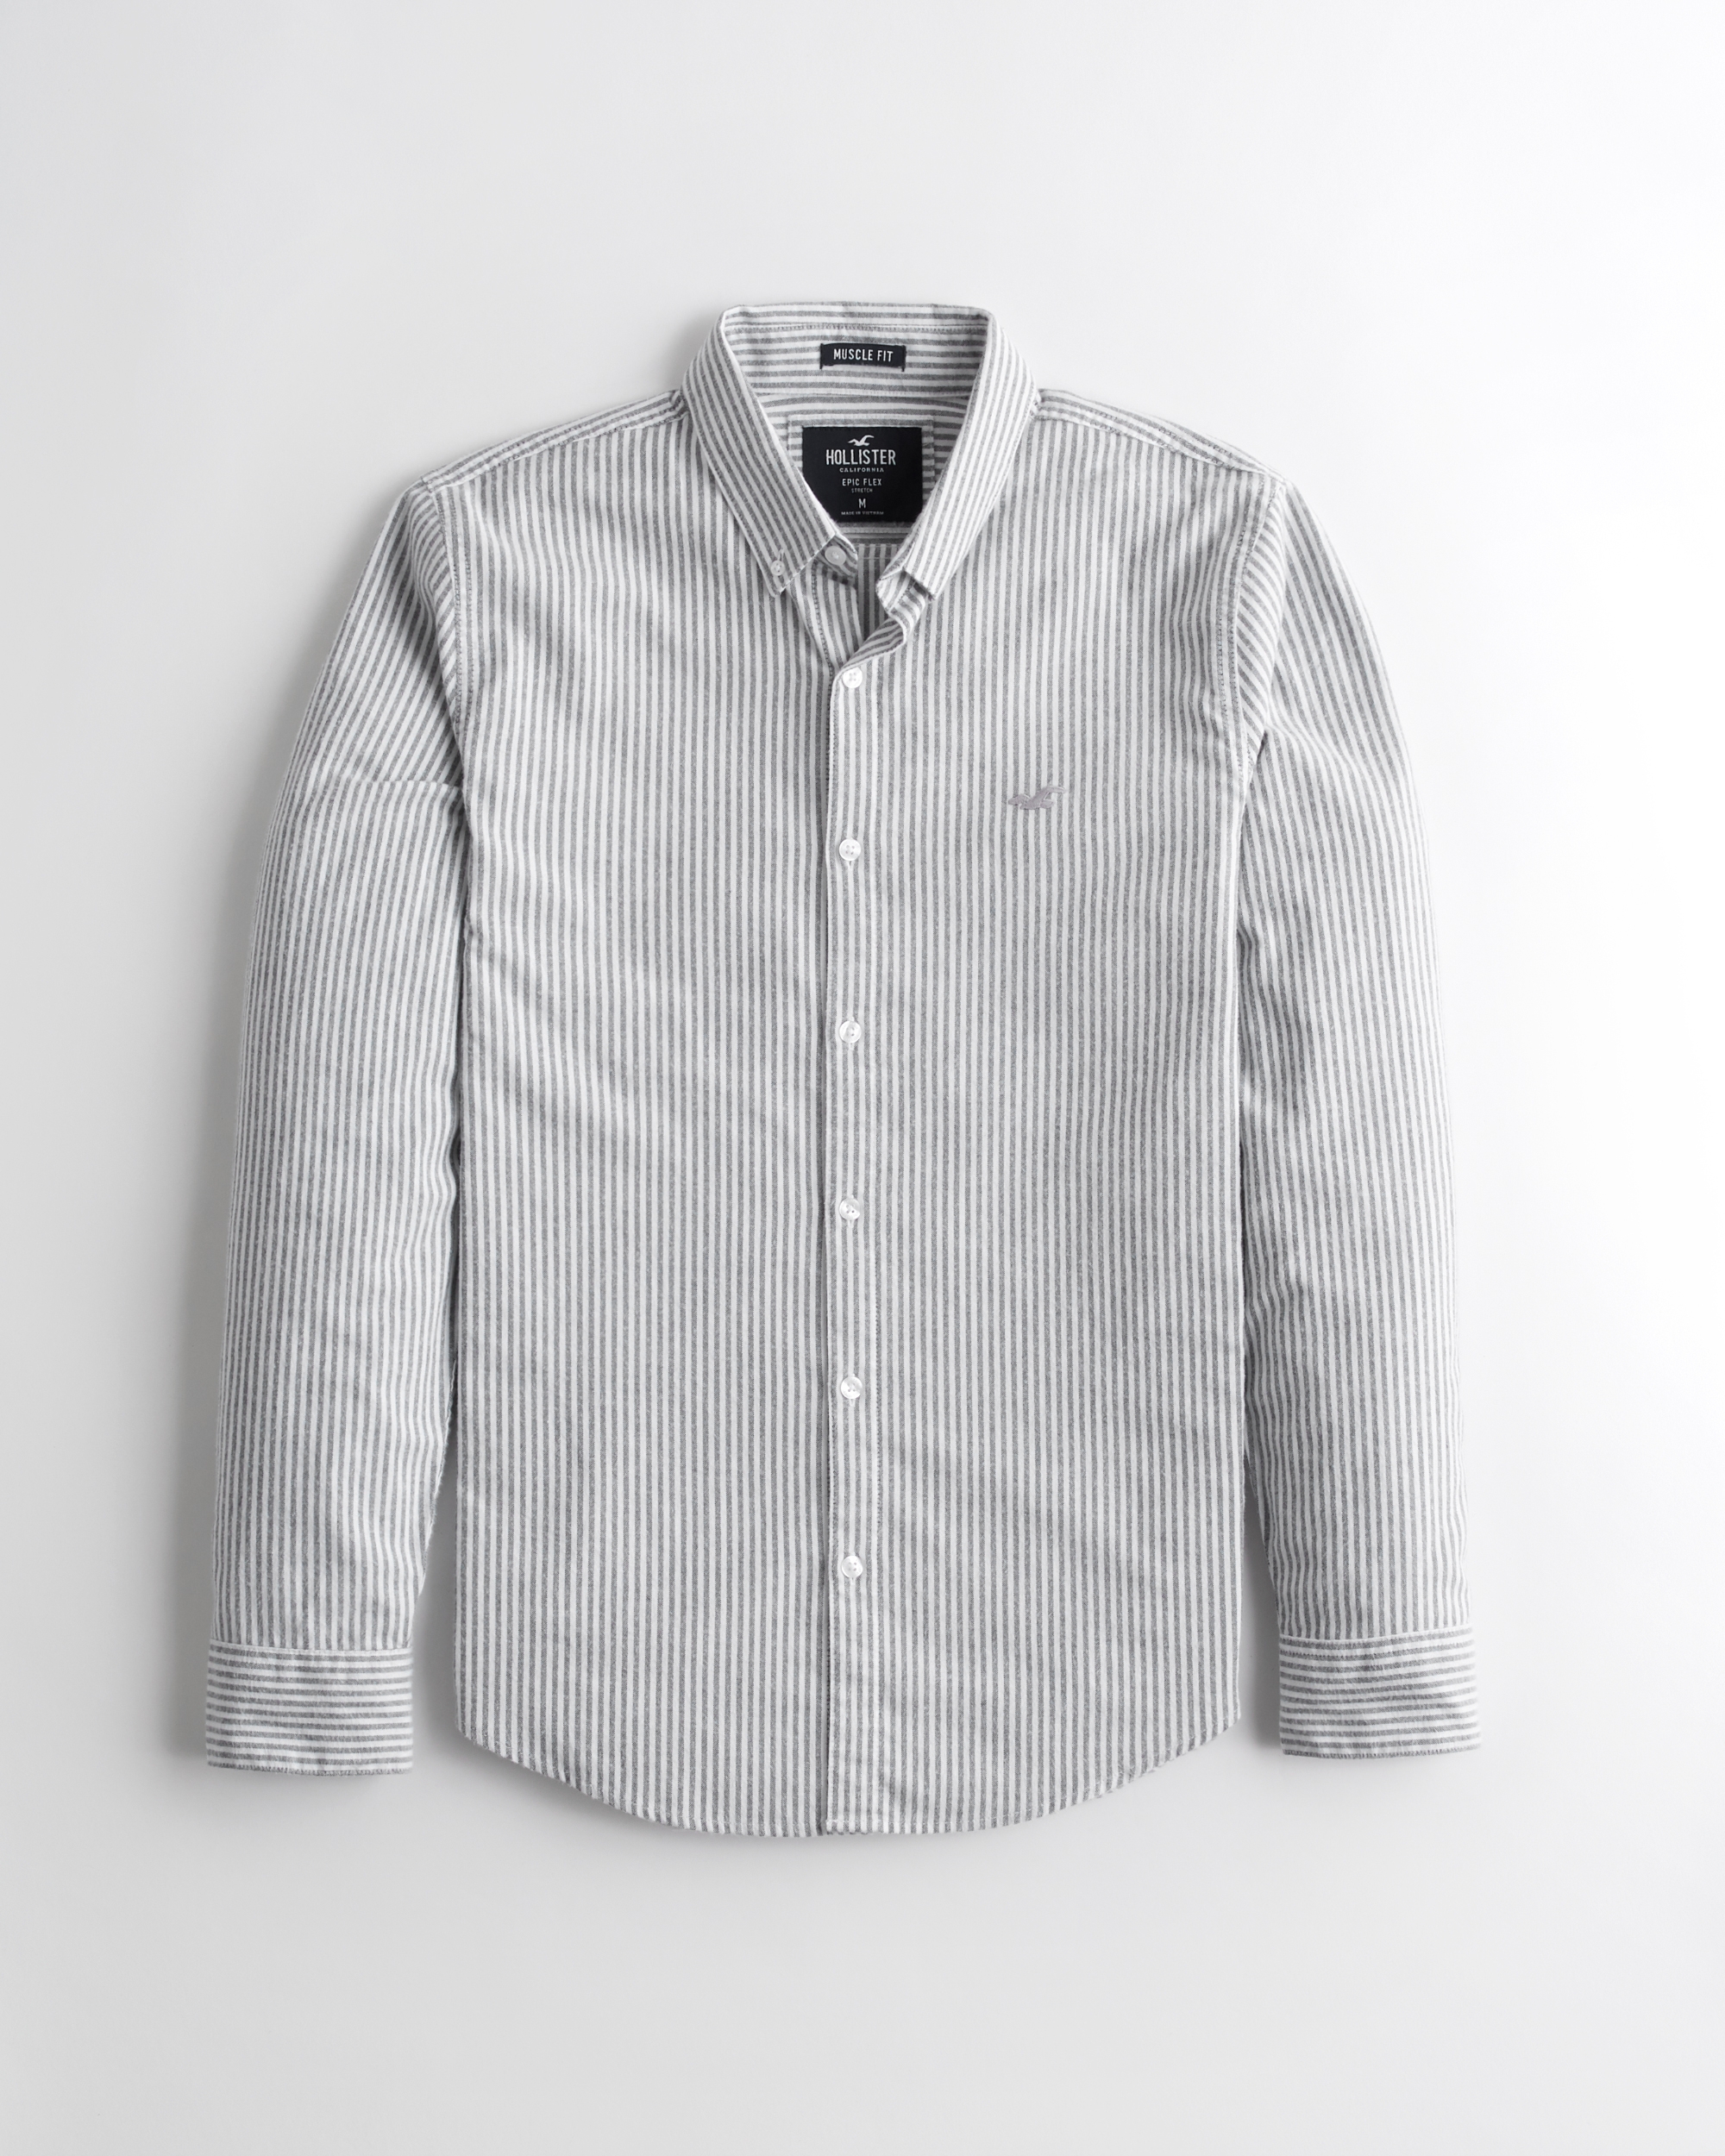 Hollister Stretch Oxford Muscle Fit Shirt